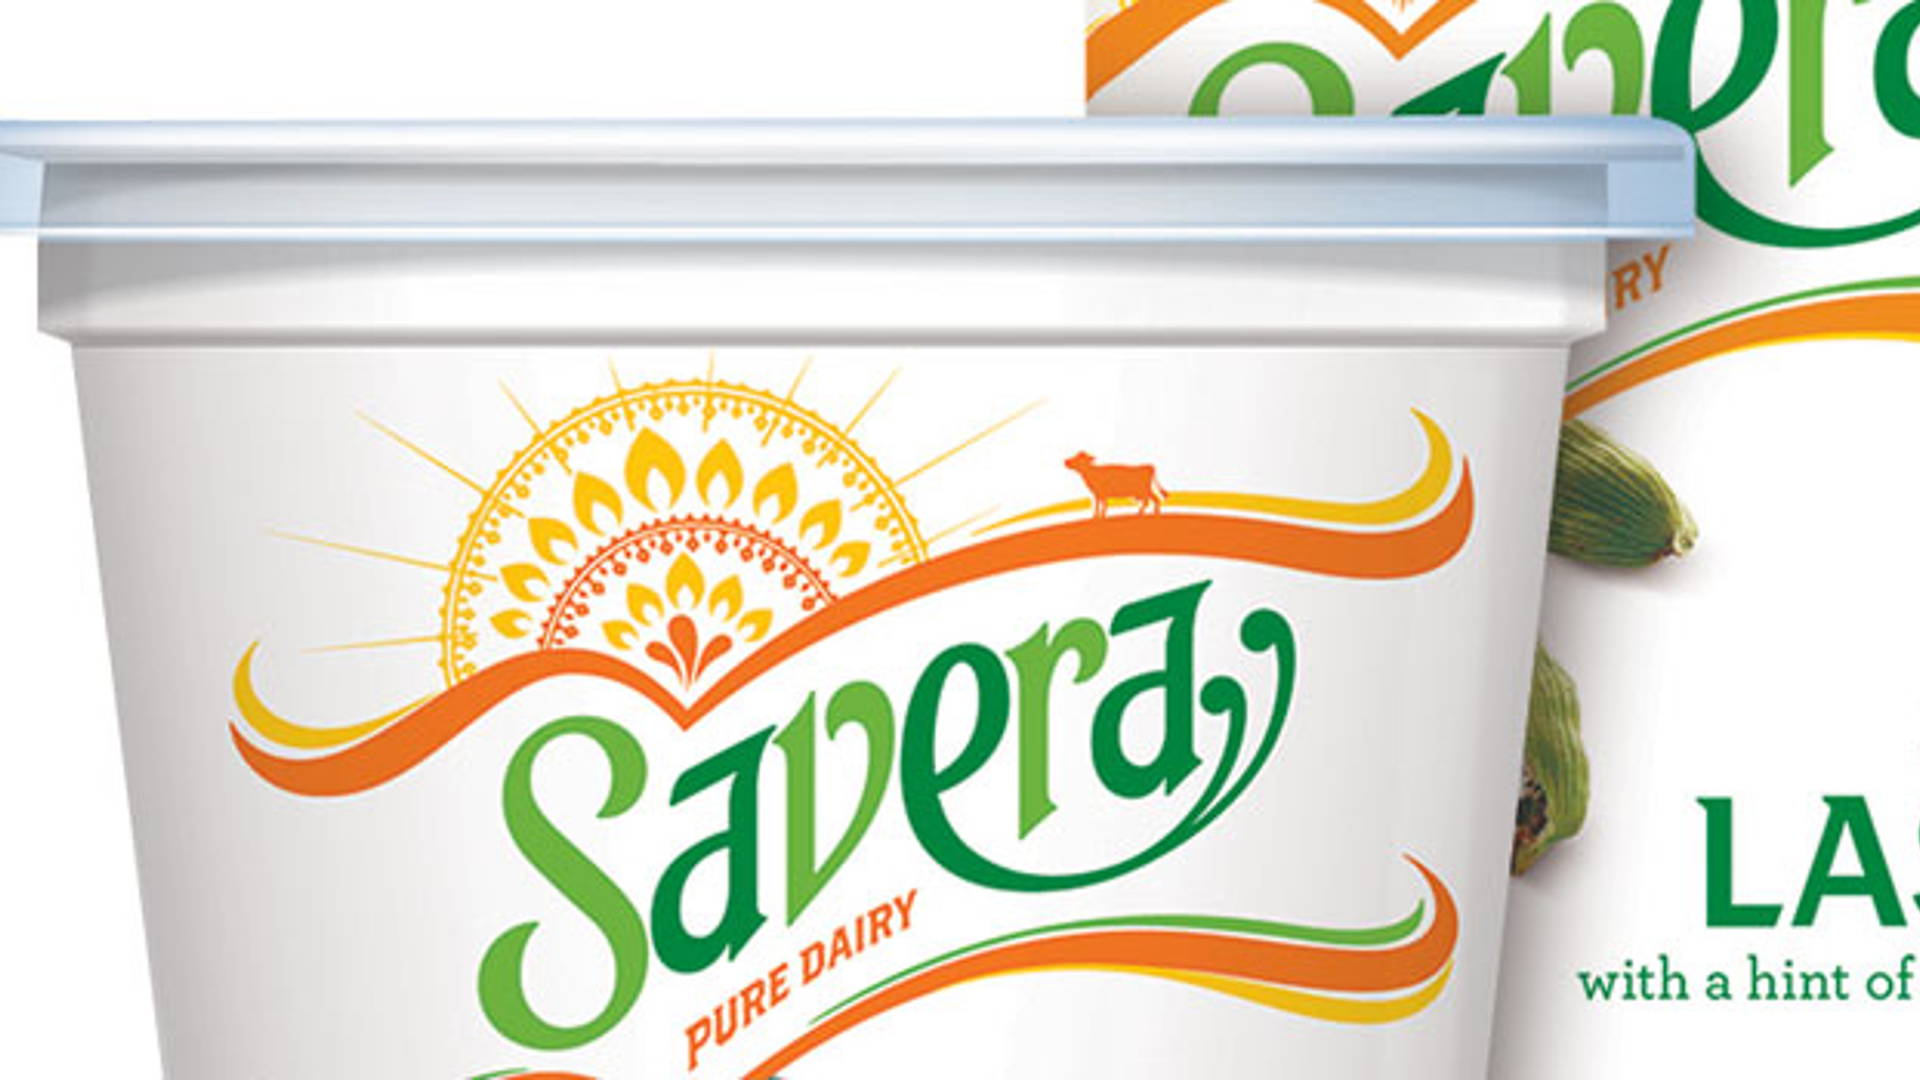 Featured image for Savera, Indian Dairy 